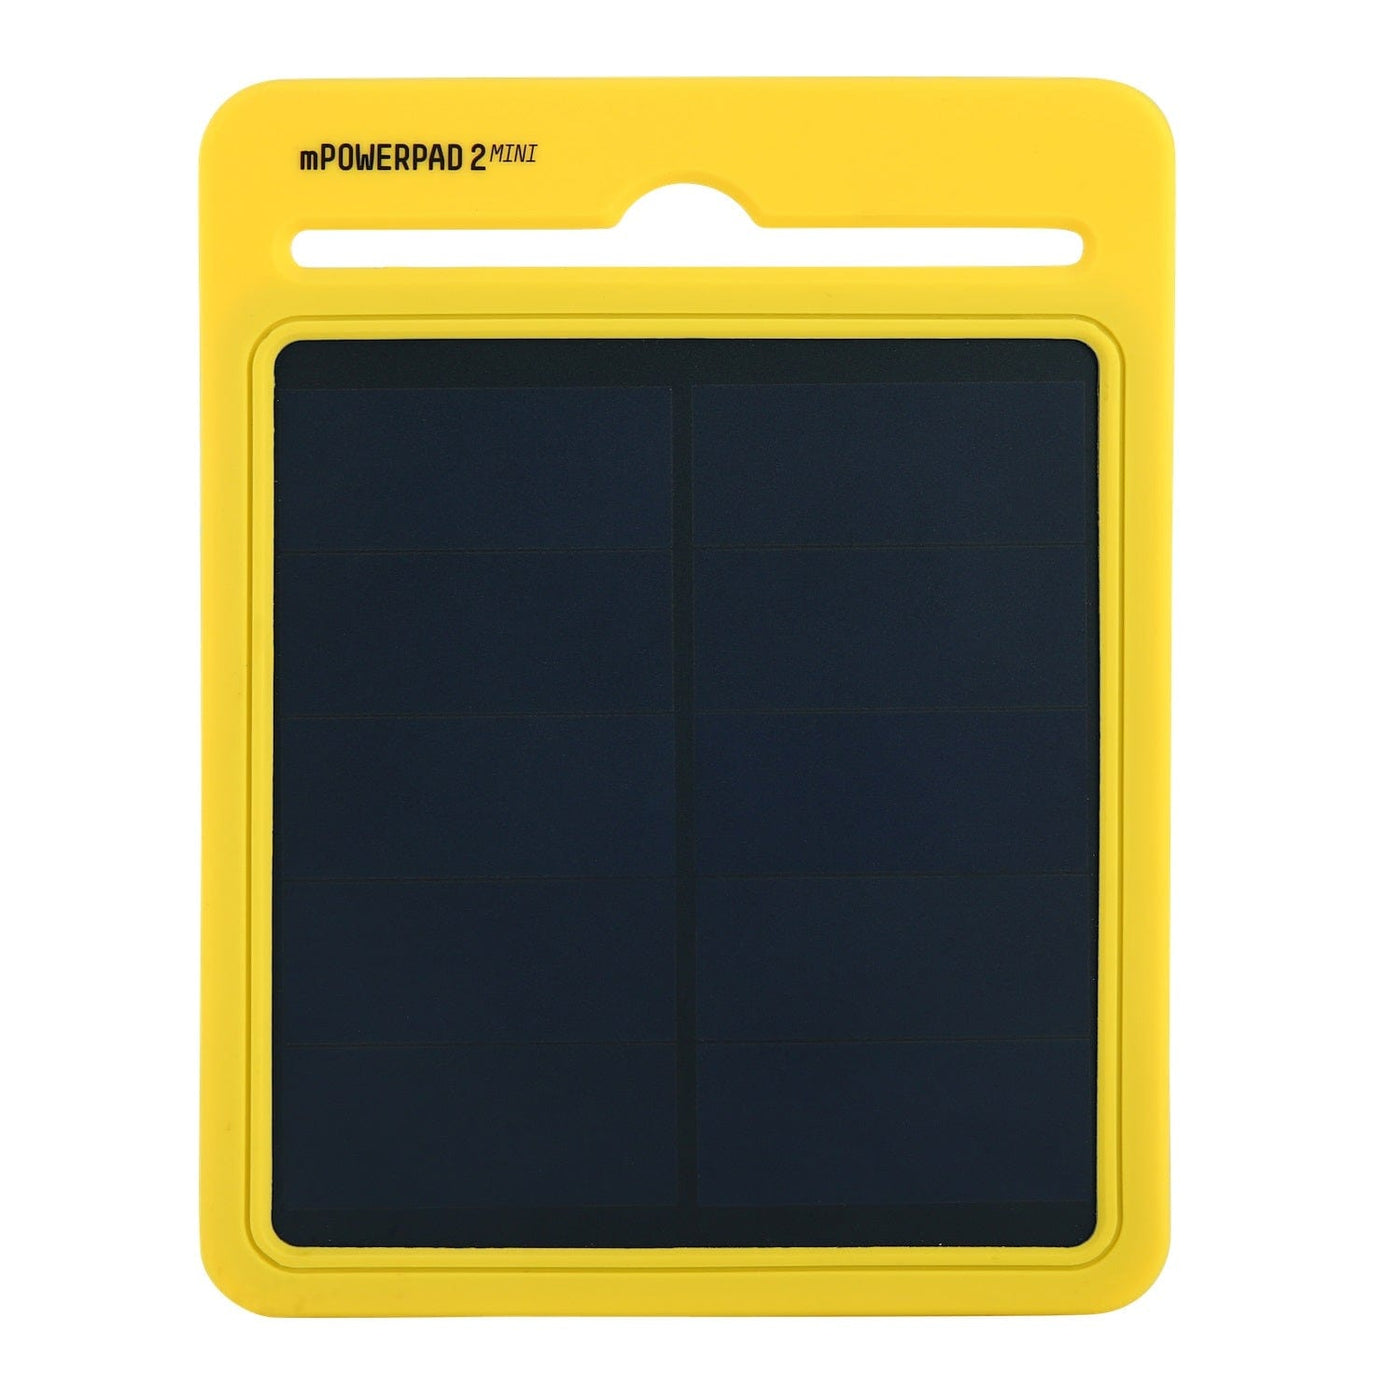 Third Wave Power Third Wave Power mPowerpad 2 Mini Solar Charger Camping And Outdoor